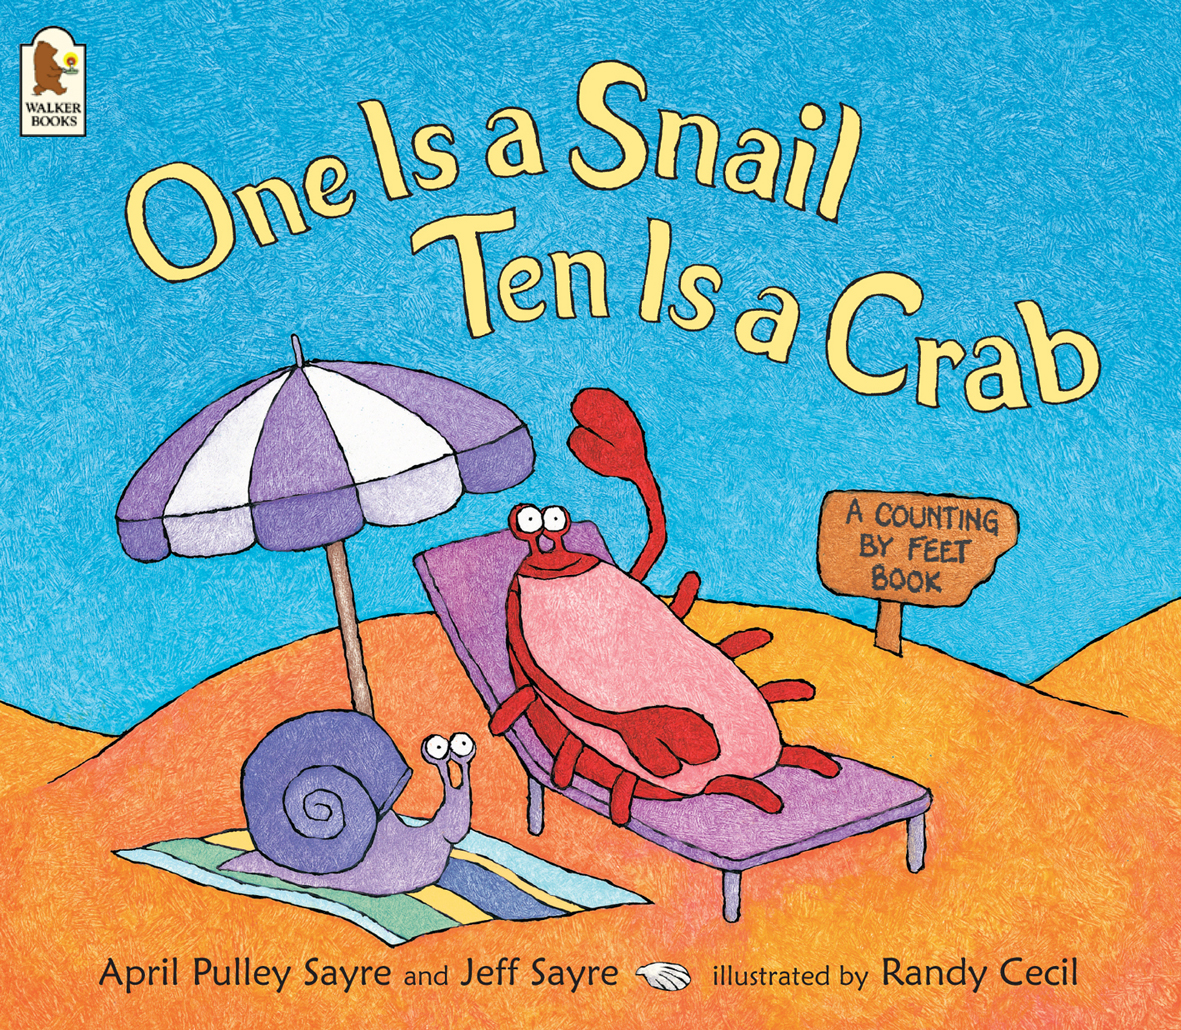 One-Is-a-Snail-Ten-Is-a-Crab